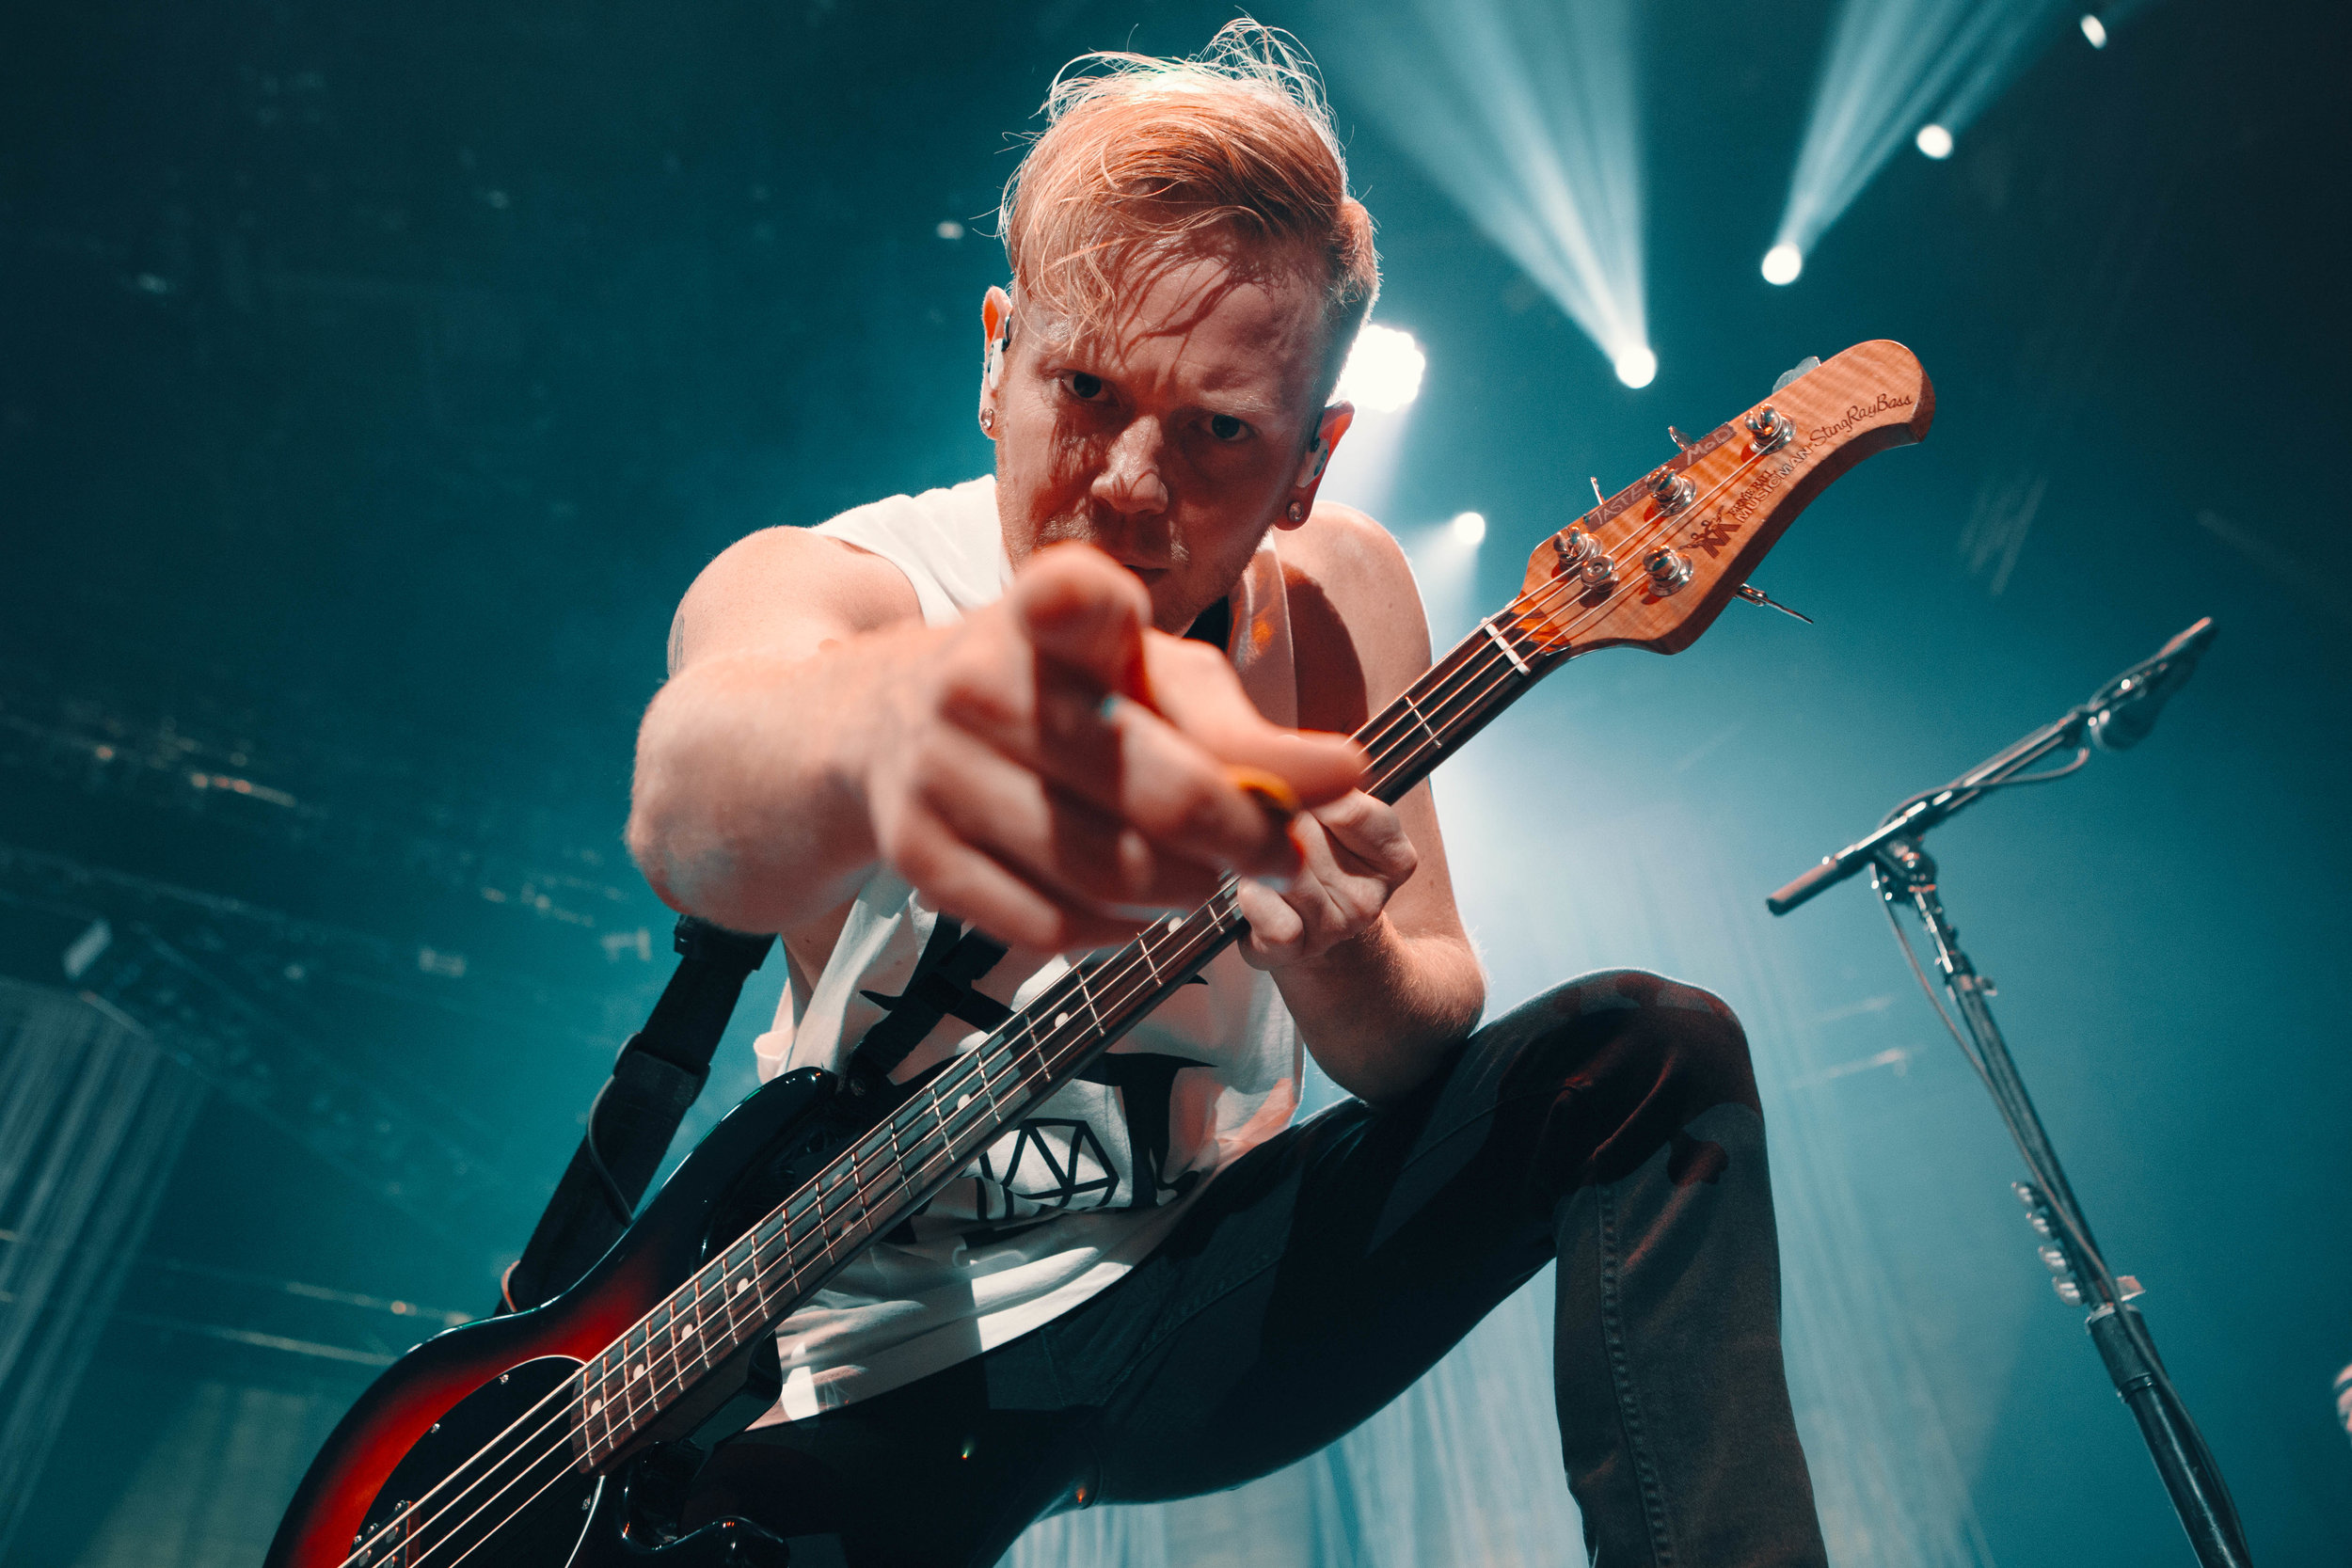  Joshua Woodward of A Day To Remember at The Forum 